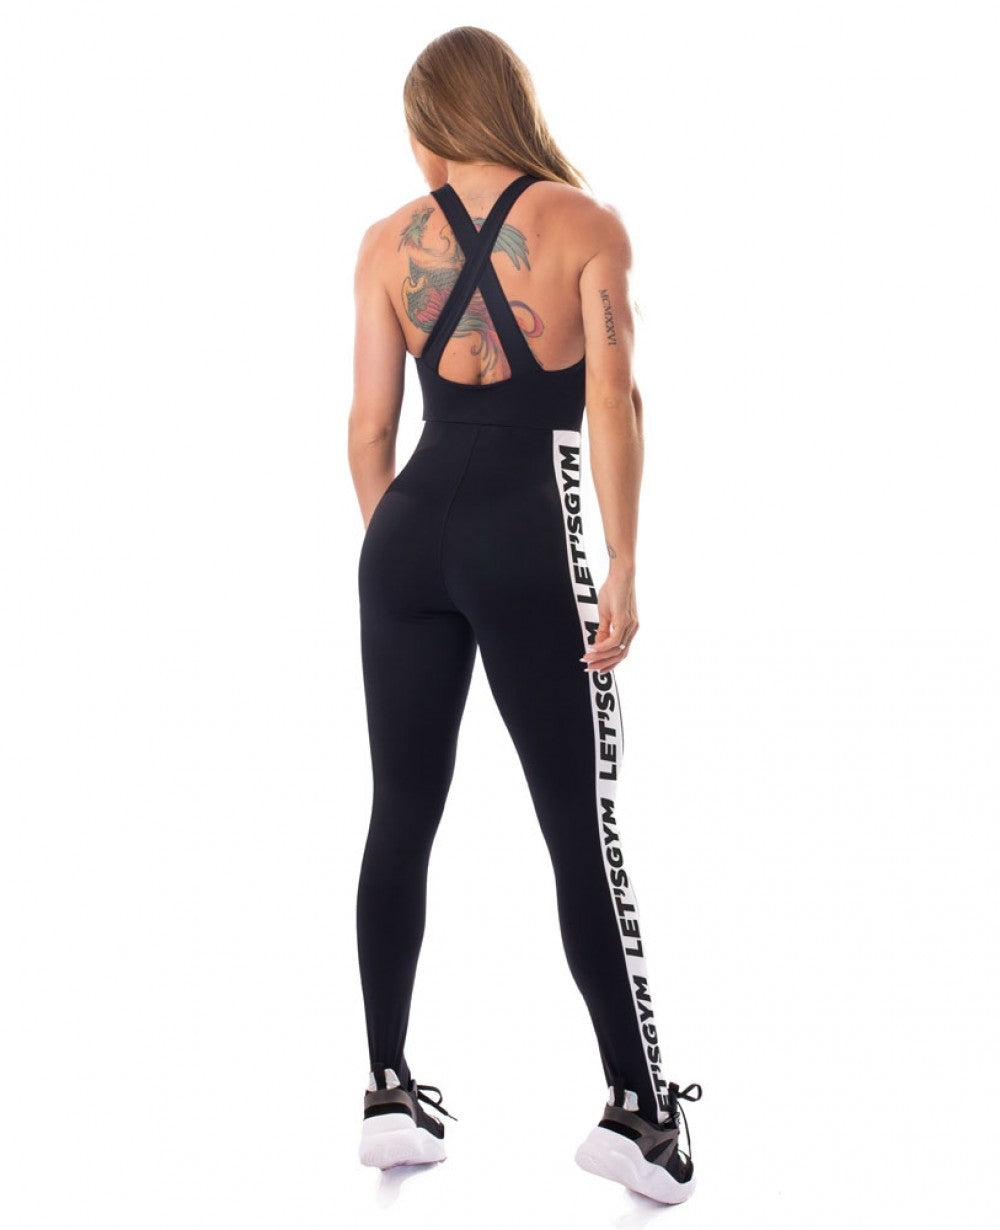 Let's Gym Brazilian Fashion Fitness Clothing Activewear Jumpsuit